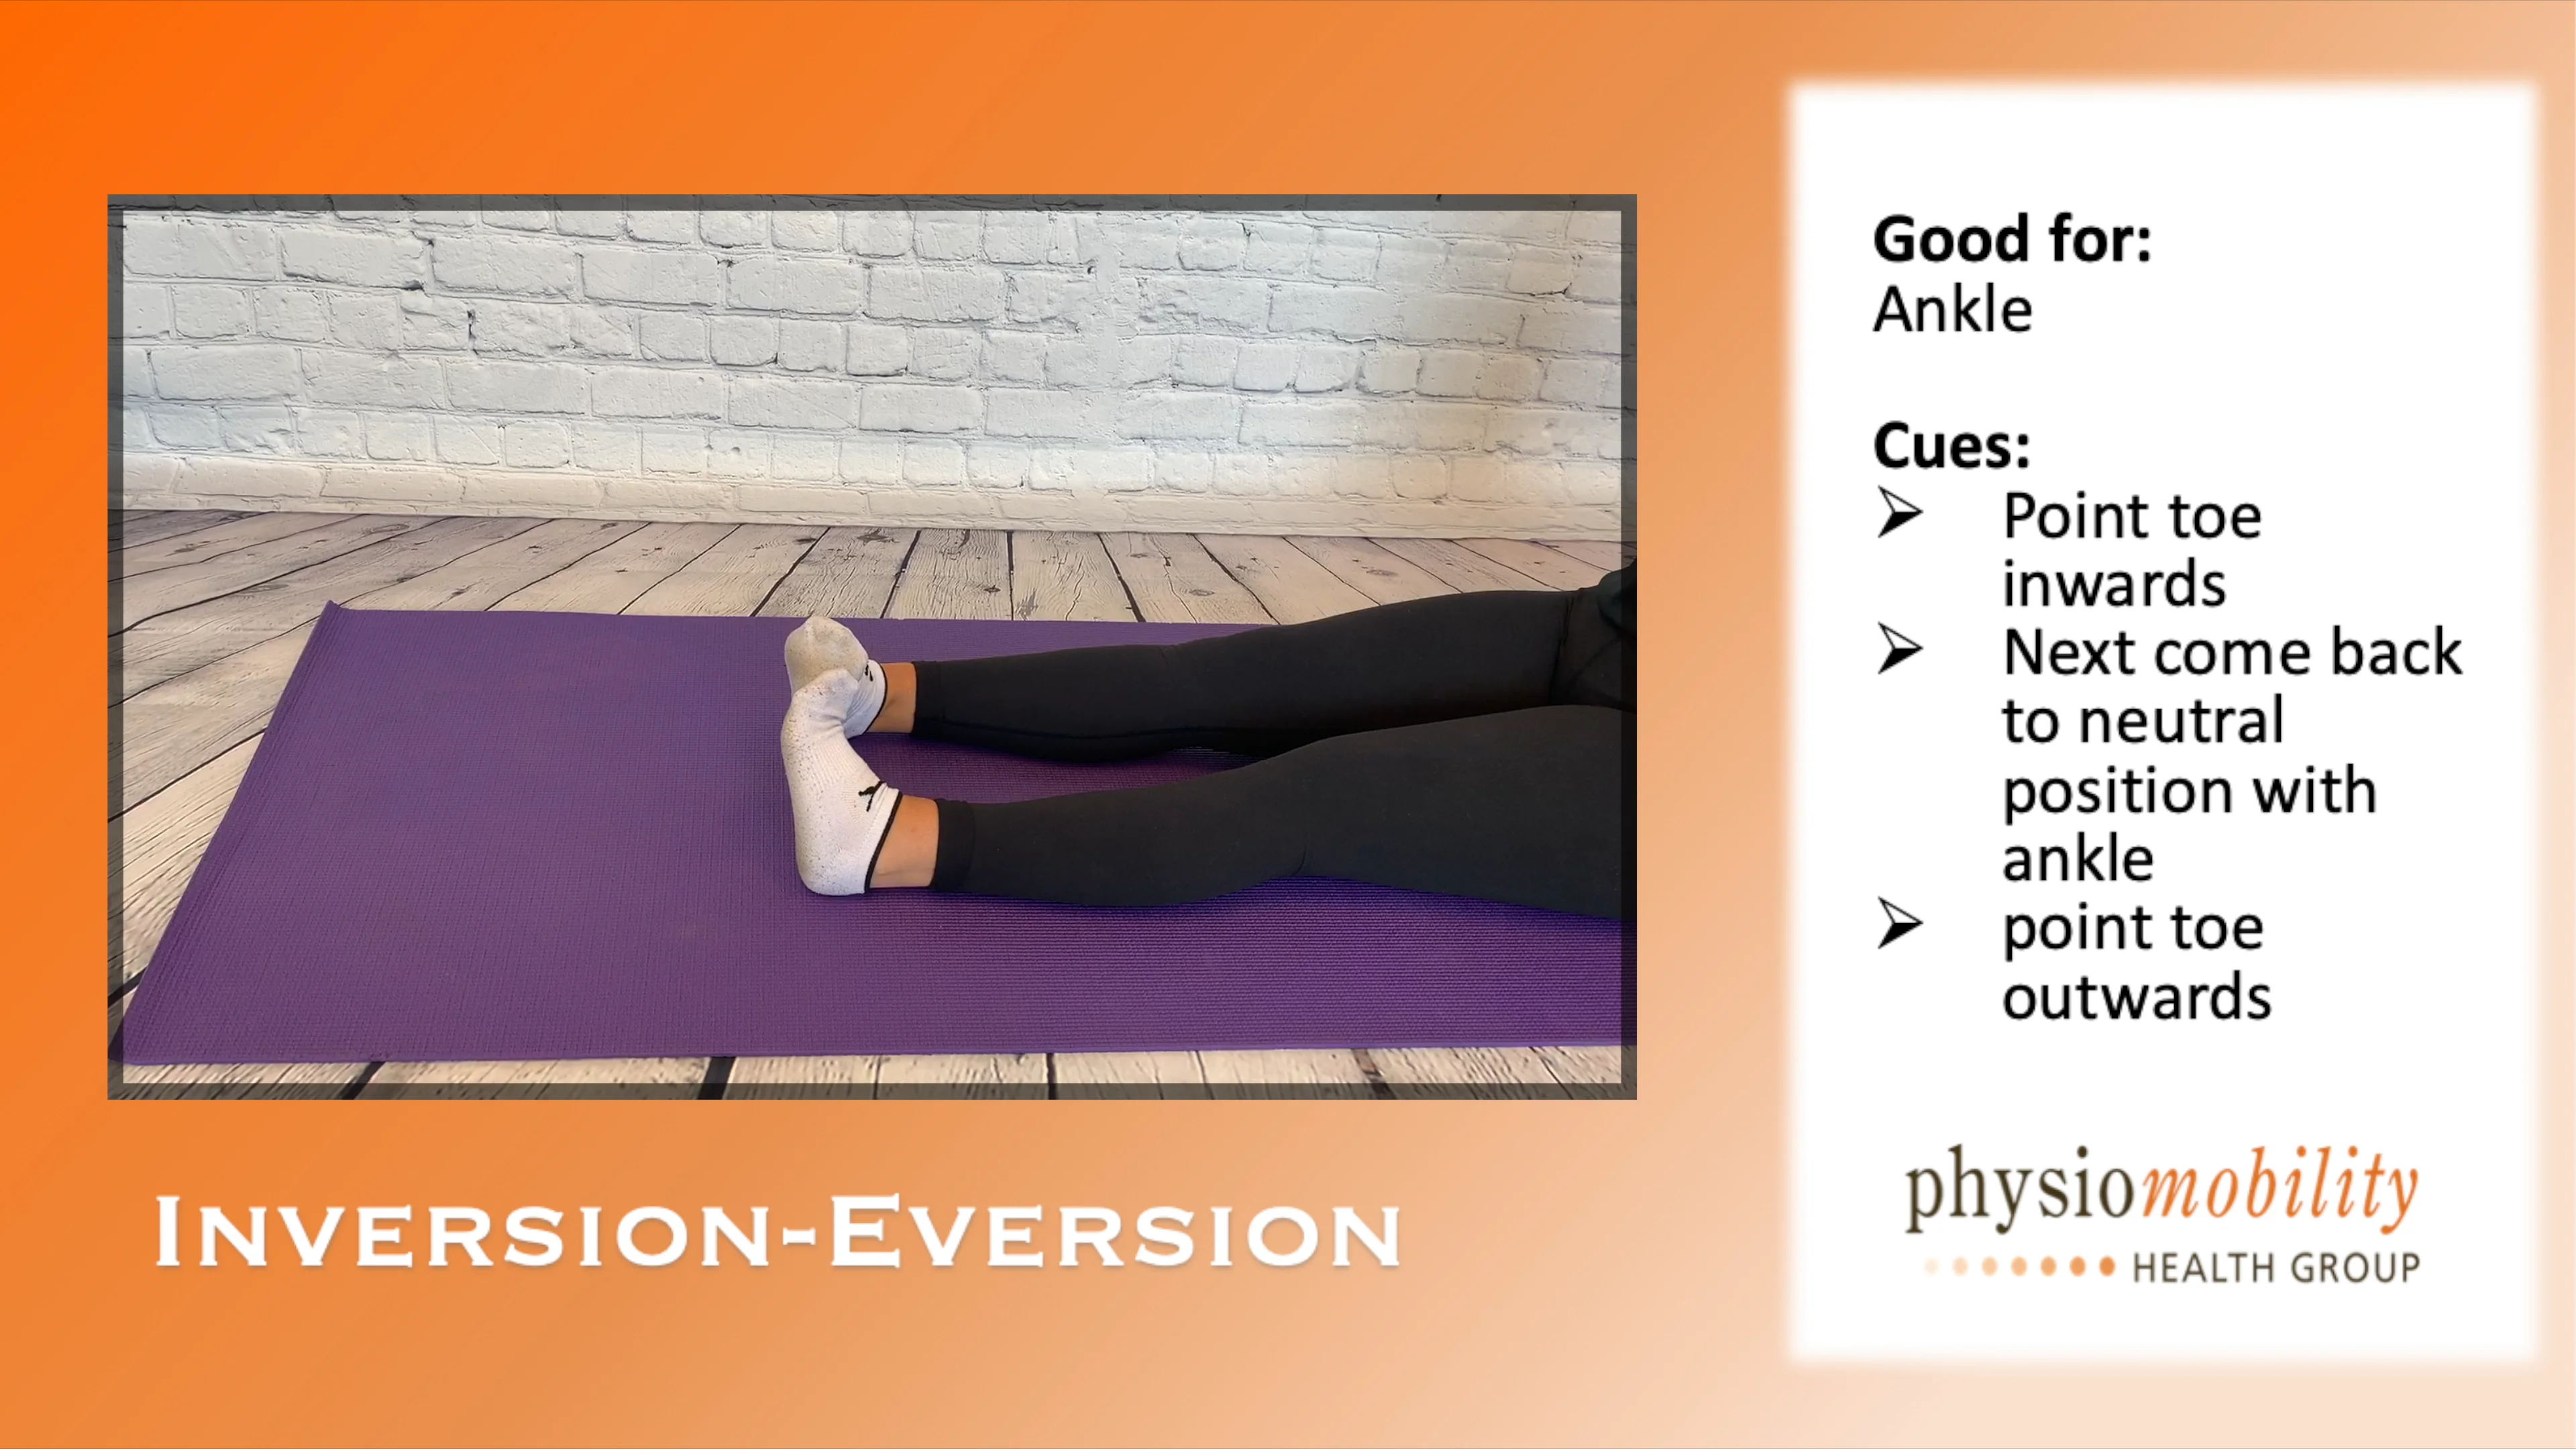 ankle-stretching-inversion-eversion-01 on Vimeo